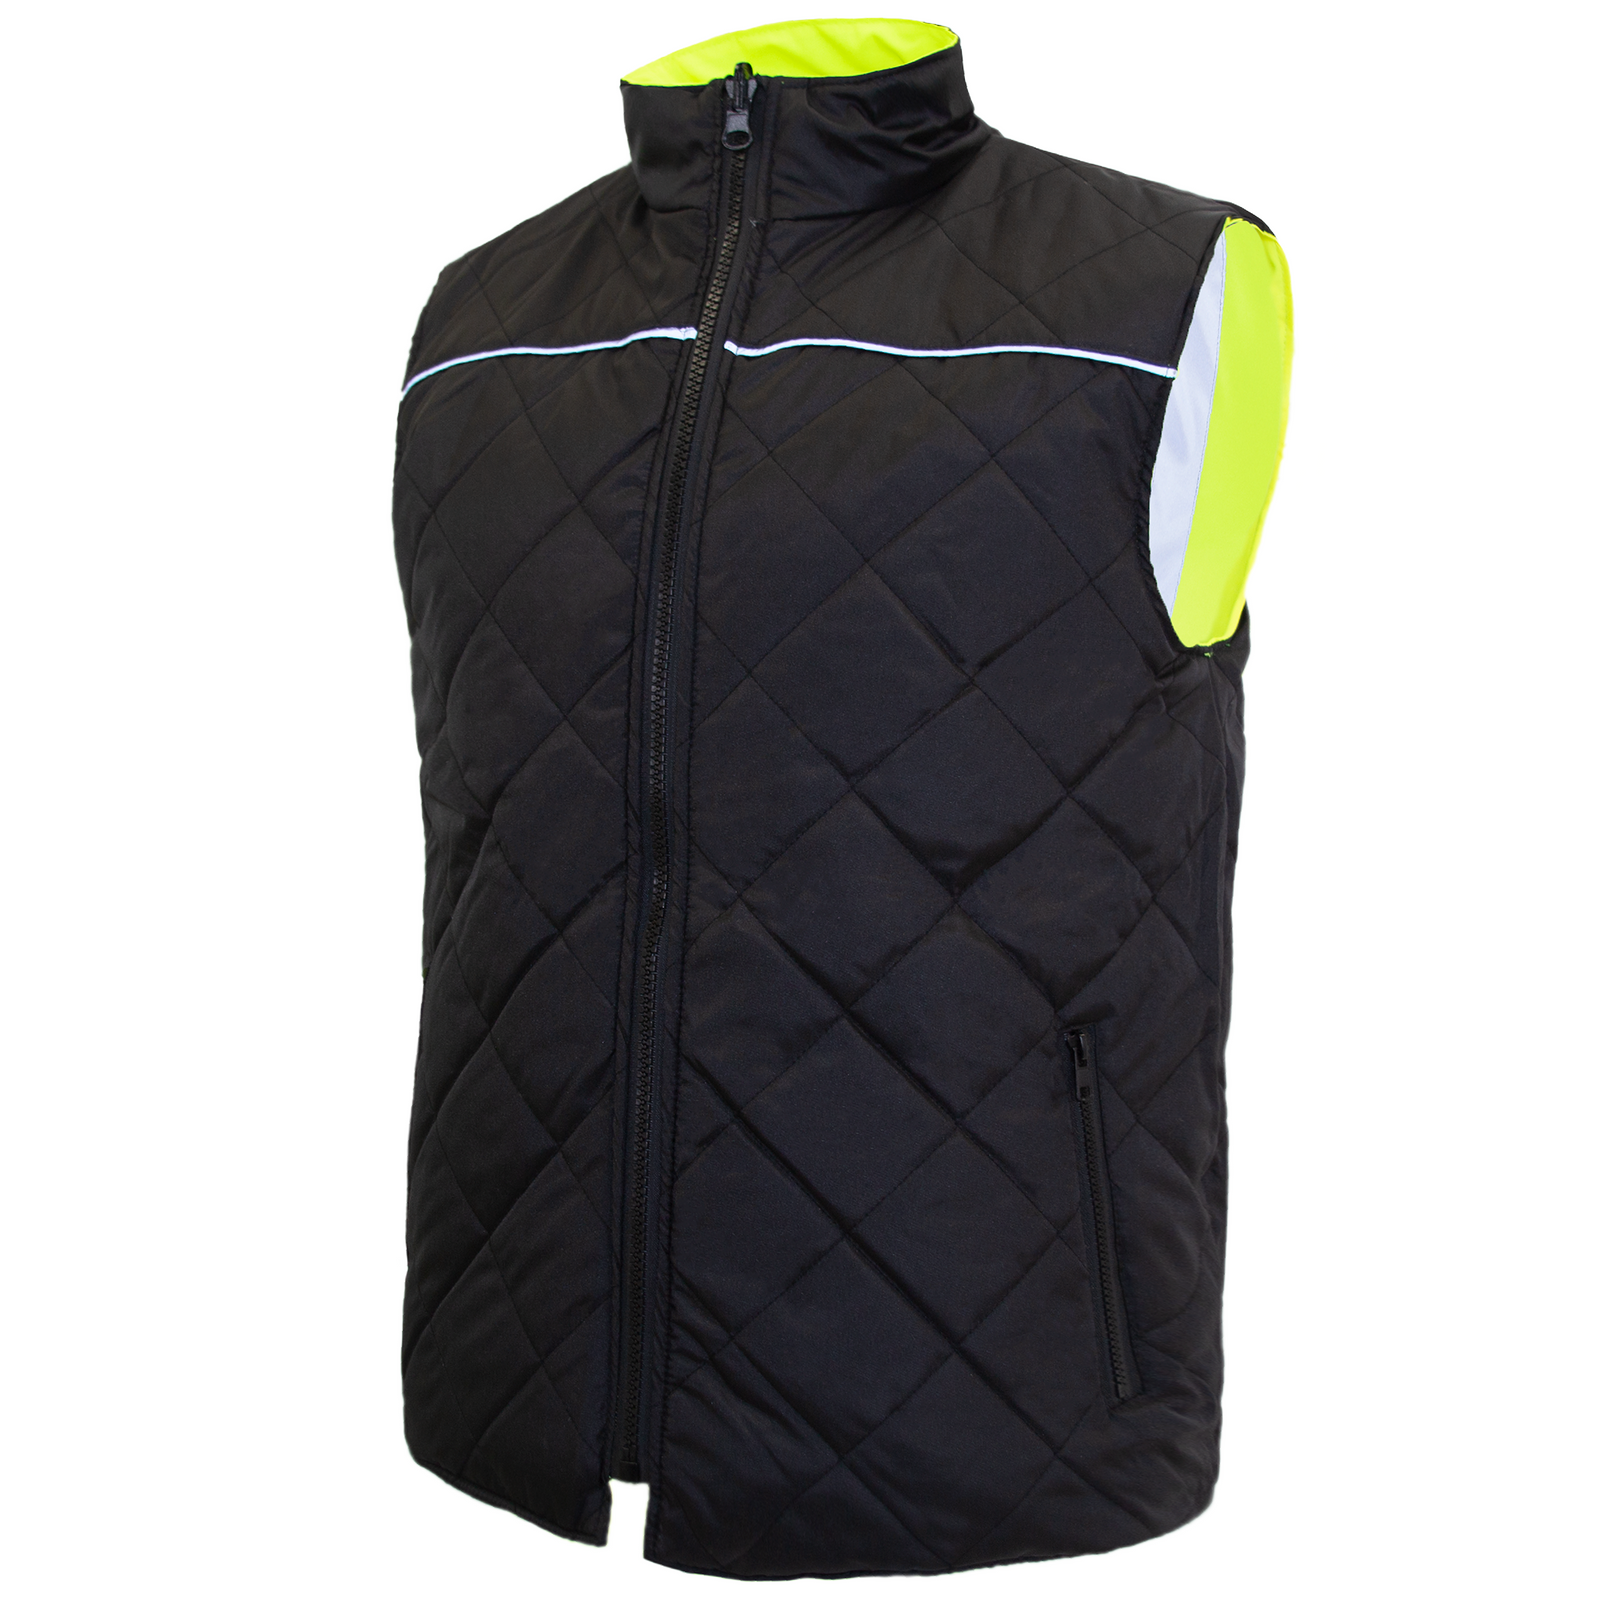 front view of the black side of the JORESTECH® reversible insulated safety vest